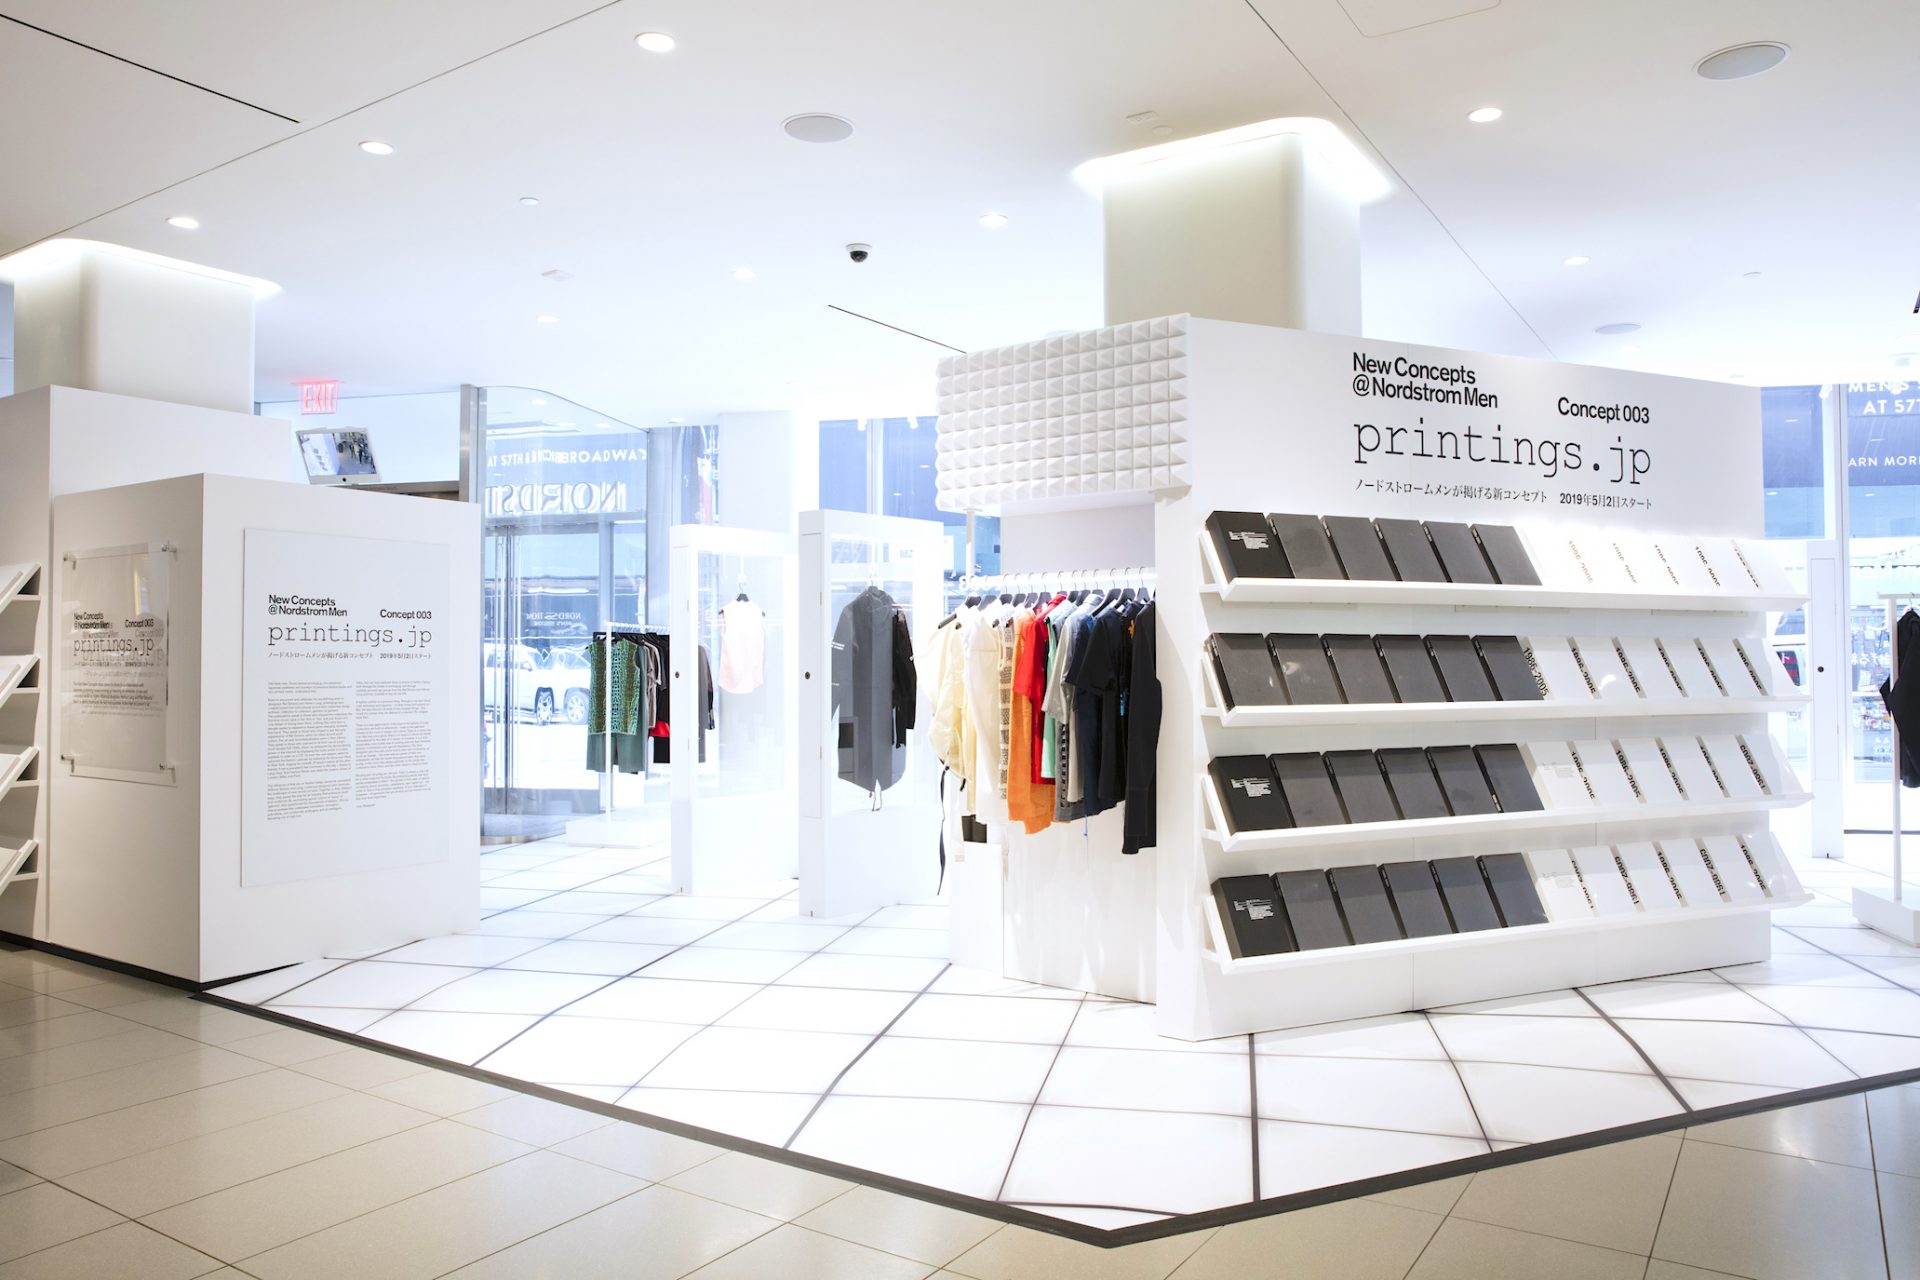 Nordstrom Pop-up Concept 003 Printings.jp Nordstrom Canada Pacifica Centre